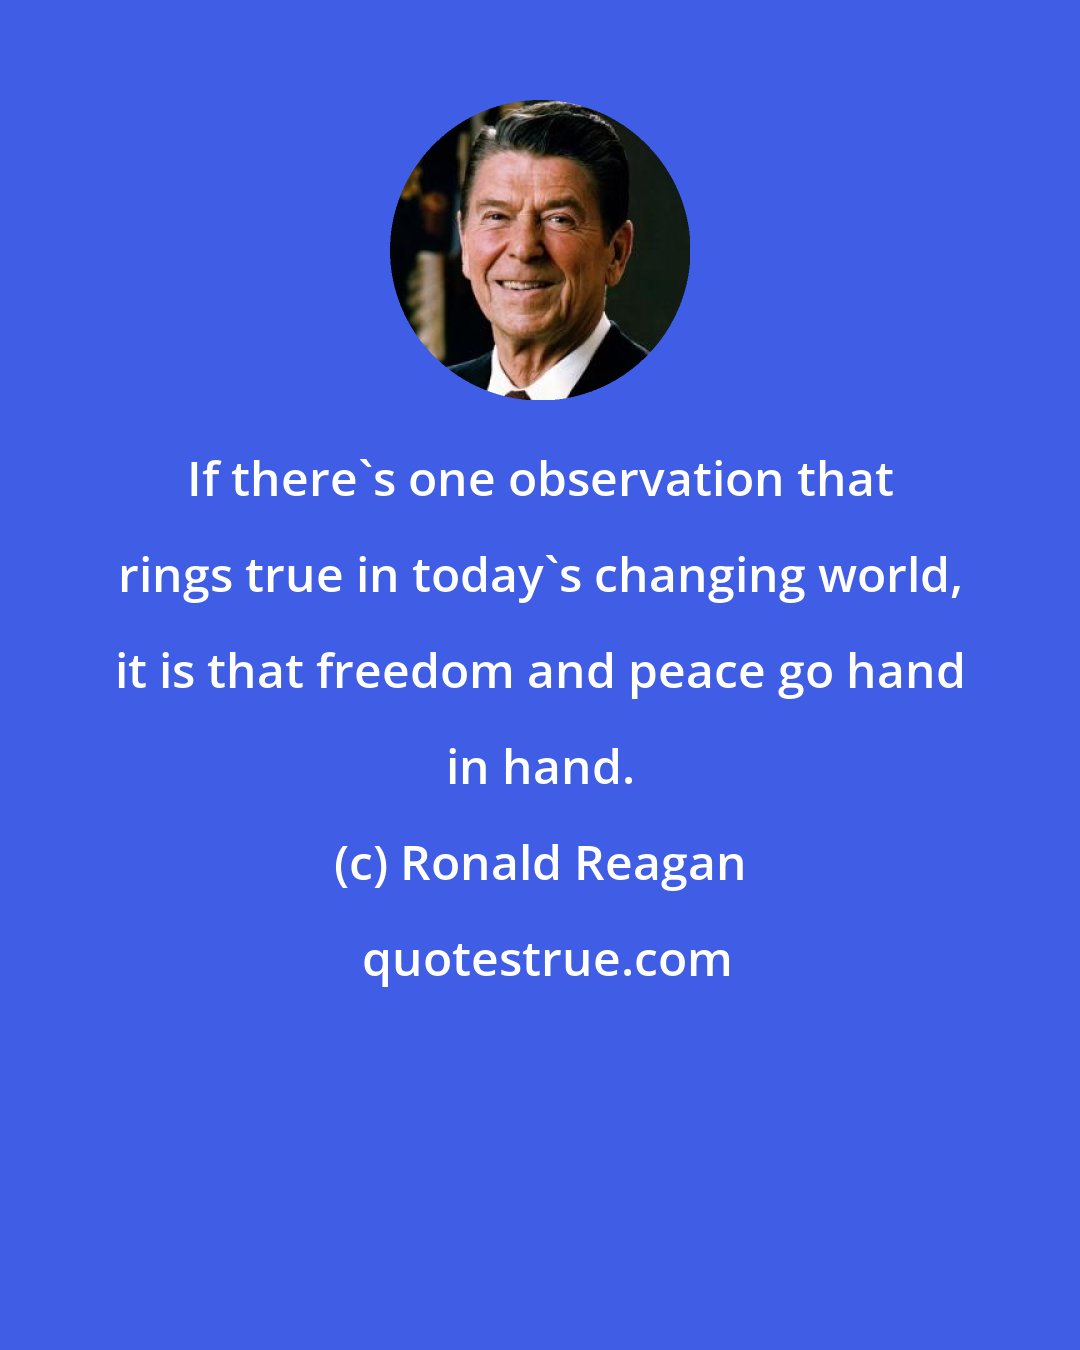 Ronald Reagan: If there's one observation that rings true in today's changing world, it is that freedom and peace go hand in hand.